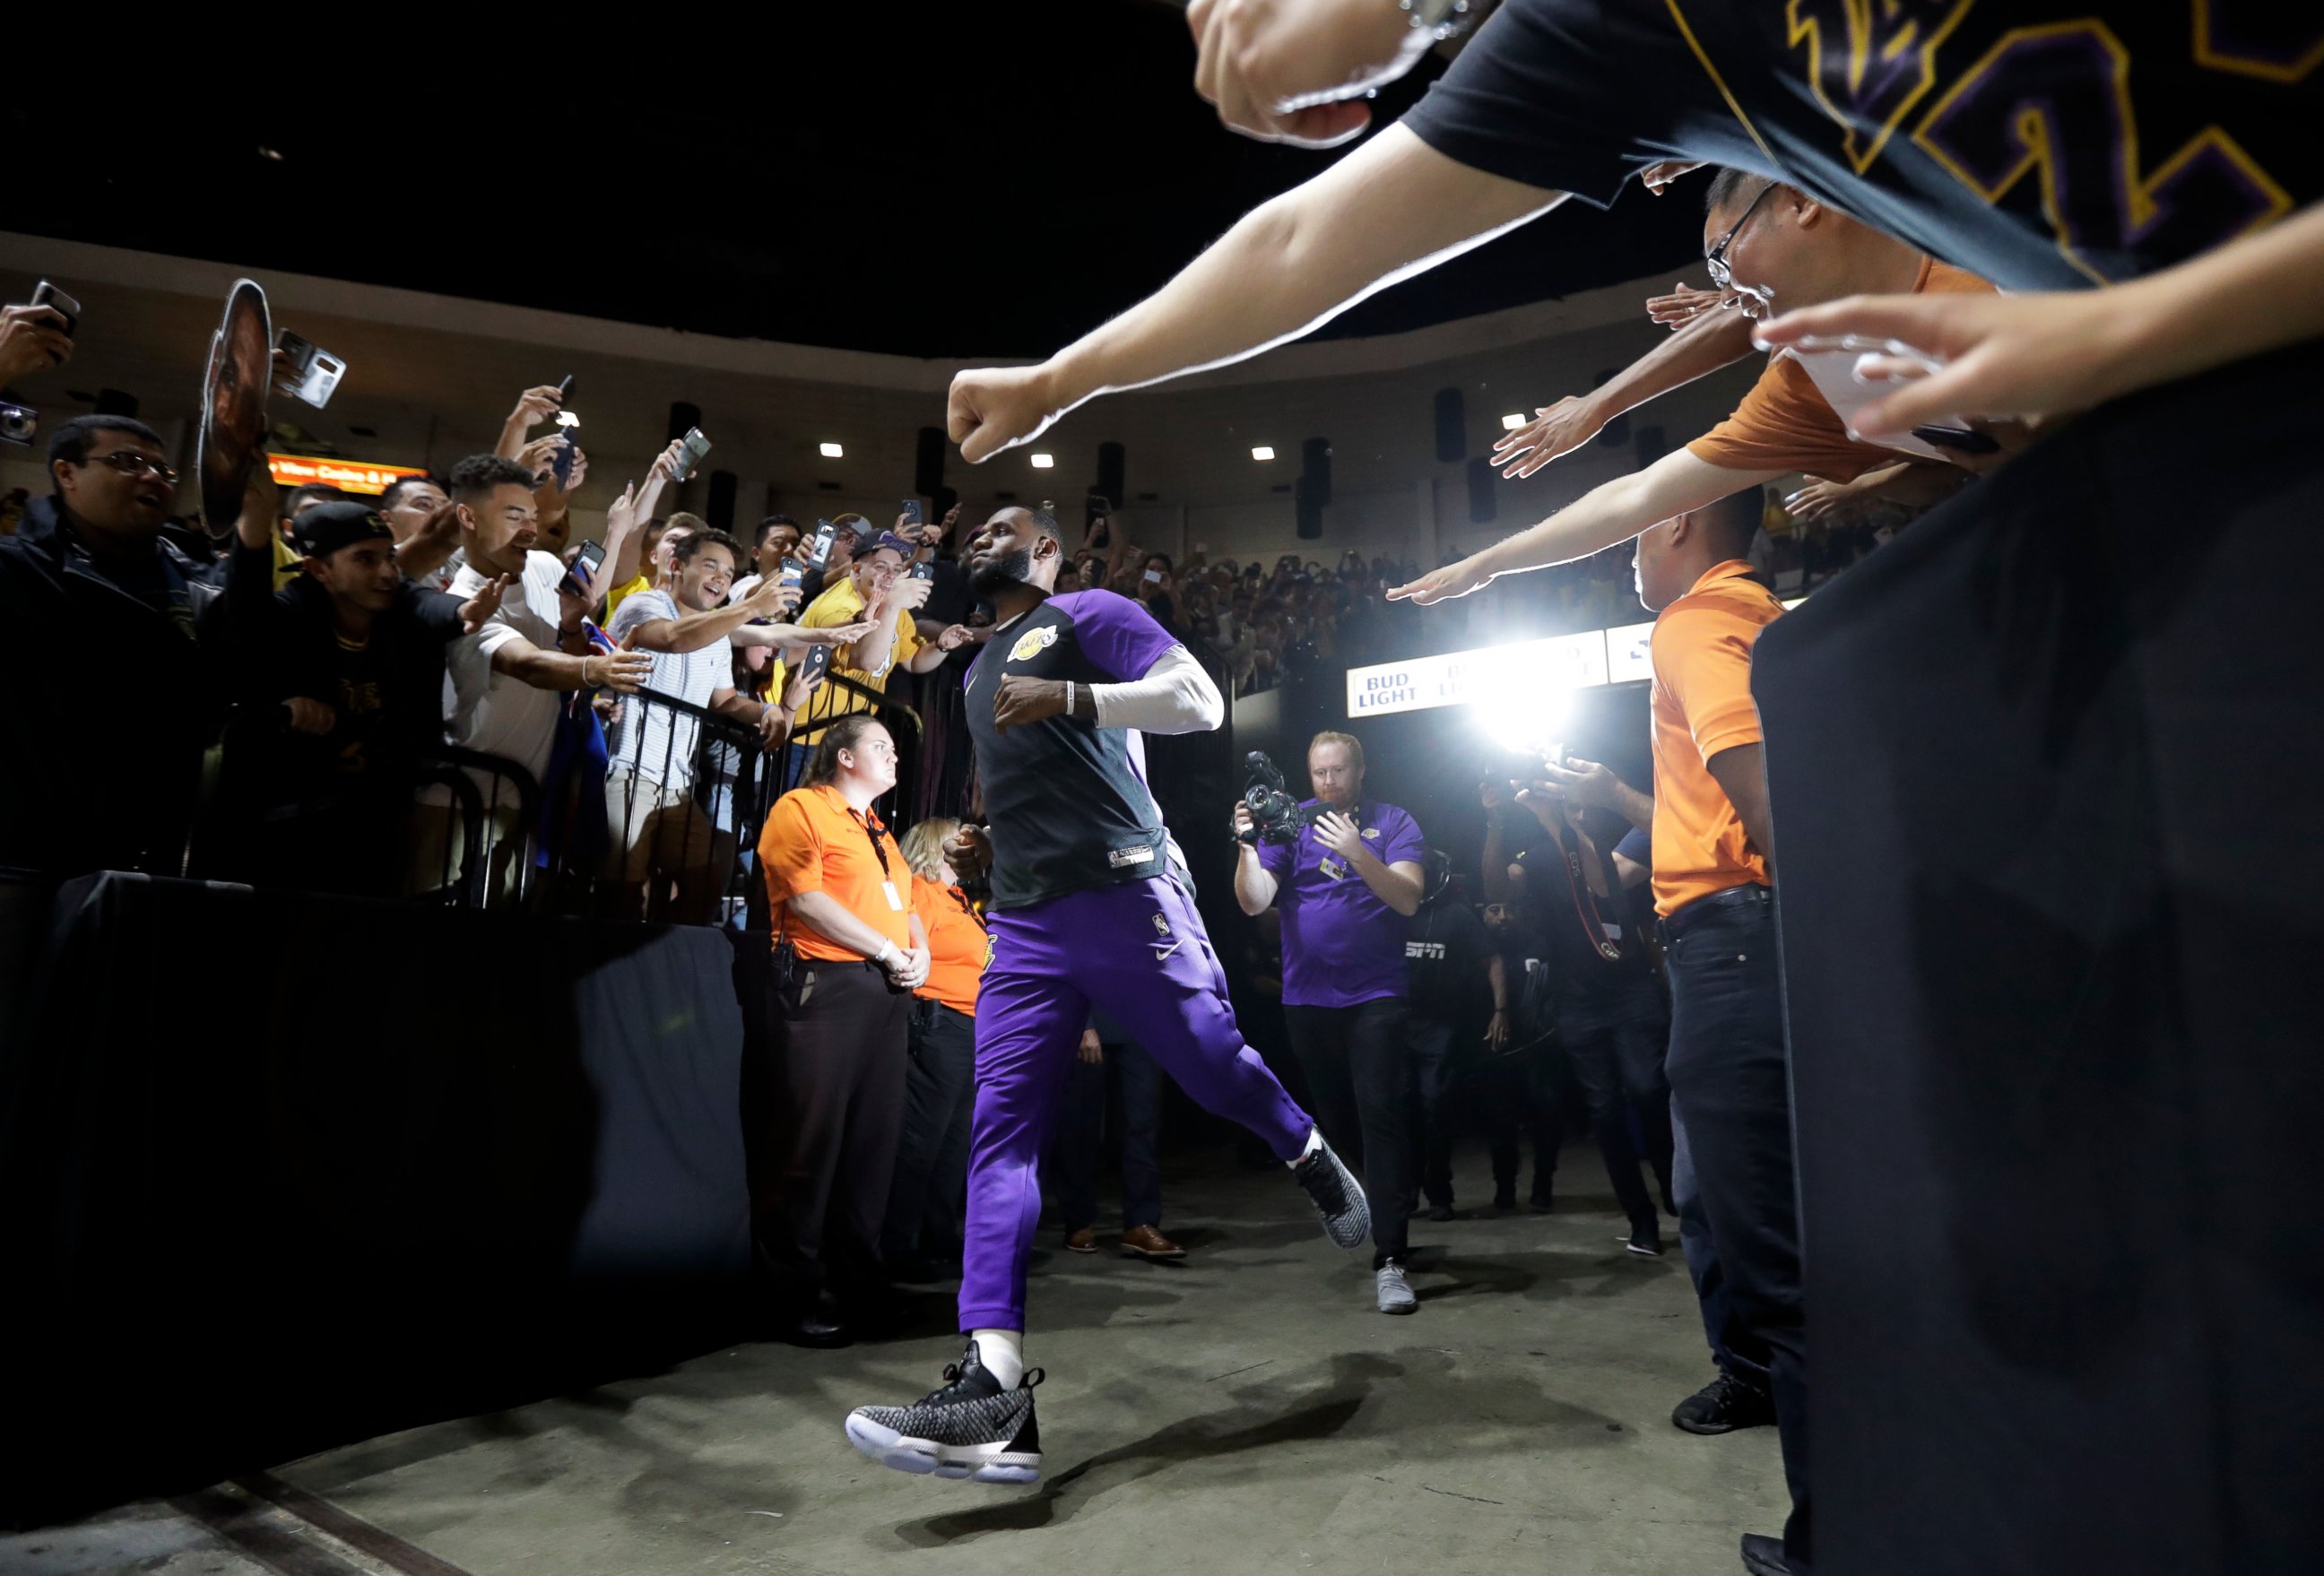 PHOTO: Los Angeles Lakers forward LeBron James runs past fans on his way to the court before an NBA preseason basketball game against the Denver Nuggets, Sunday, Sept. 30, 2018, in San Diego.